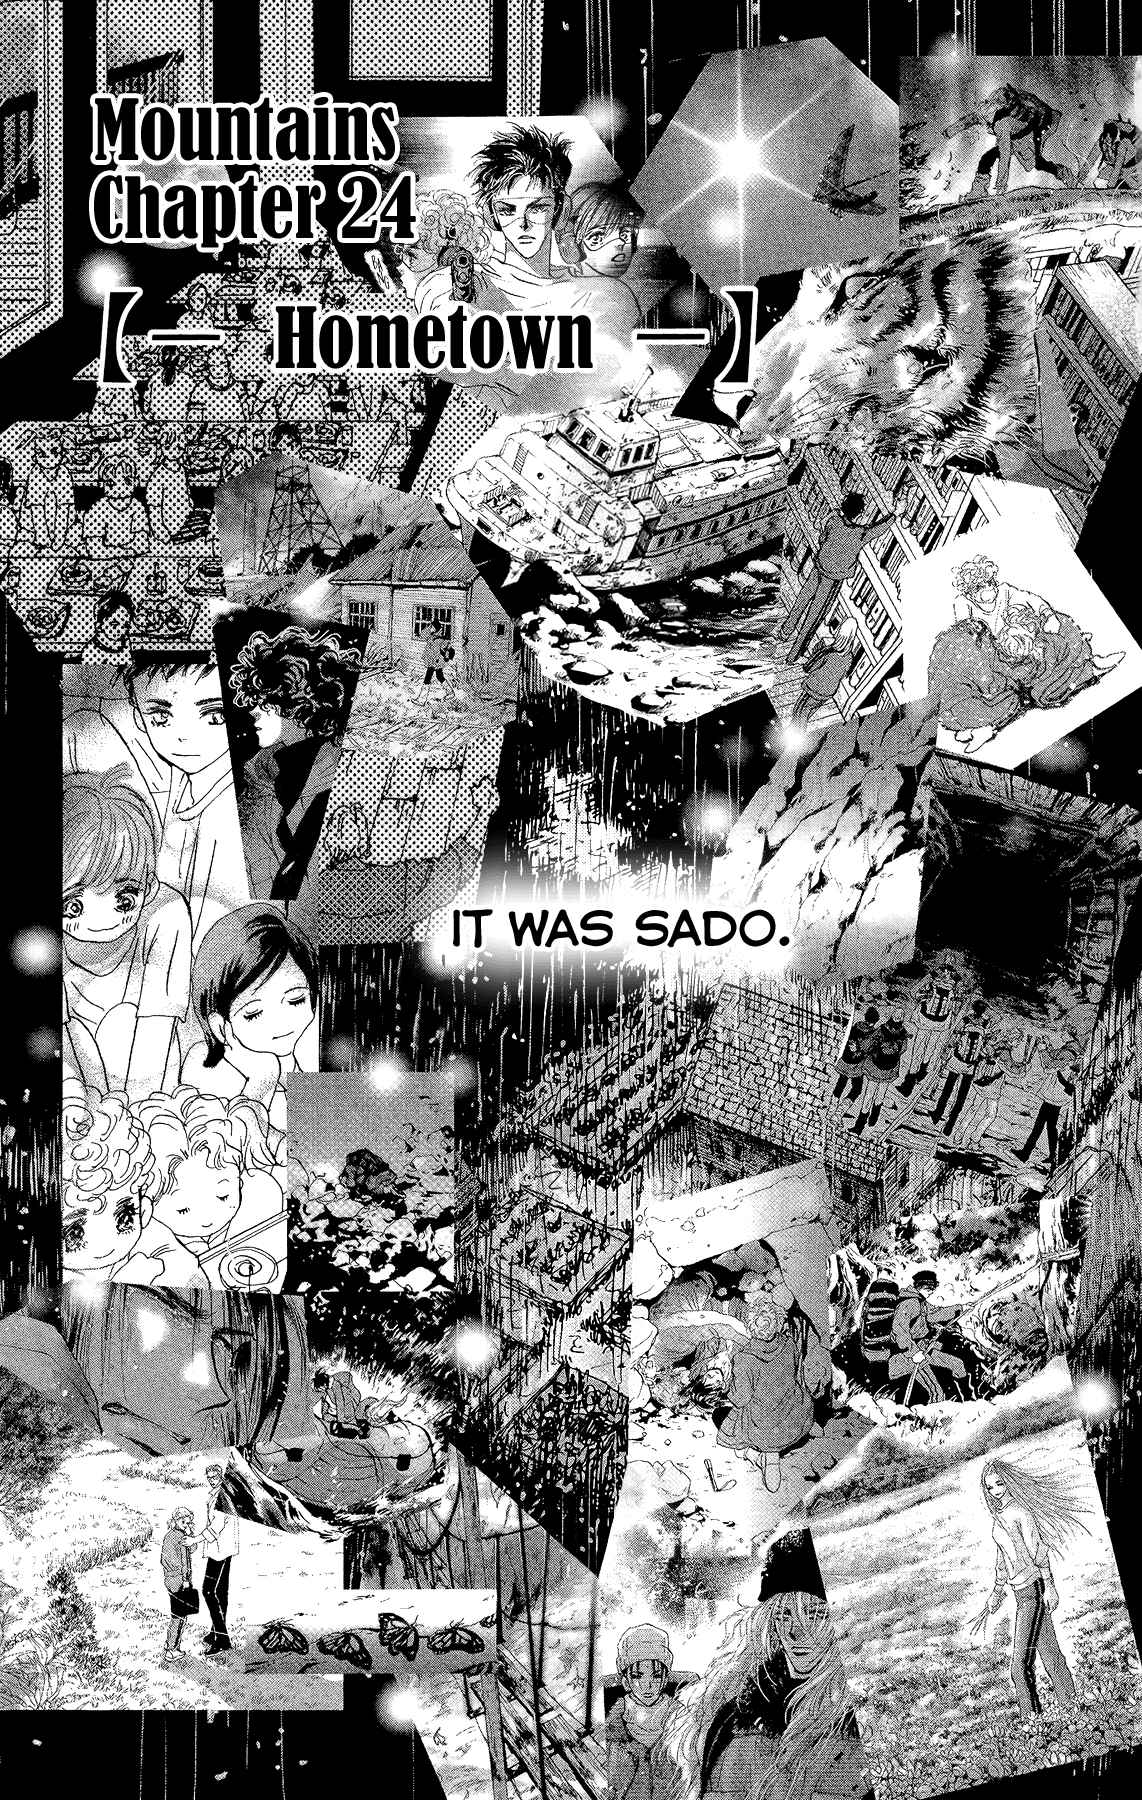 7 Seeds Vol. 31 Ch. 159 Mountains Chapter 24 [Hometown]